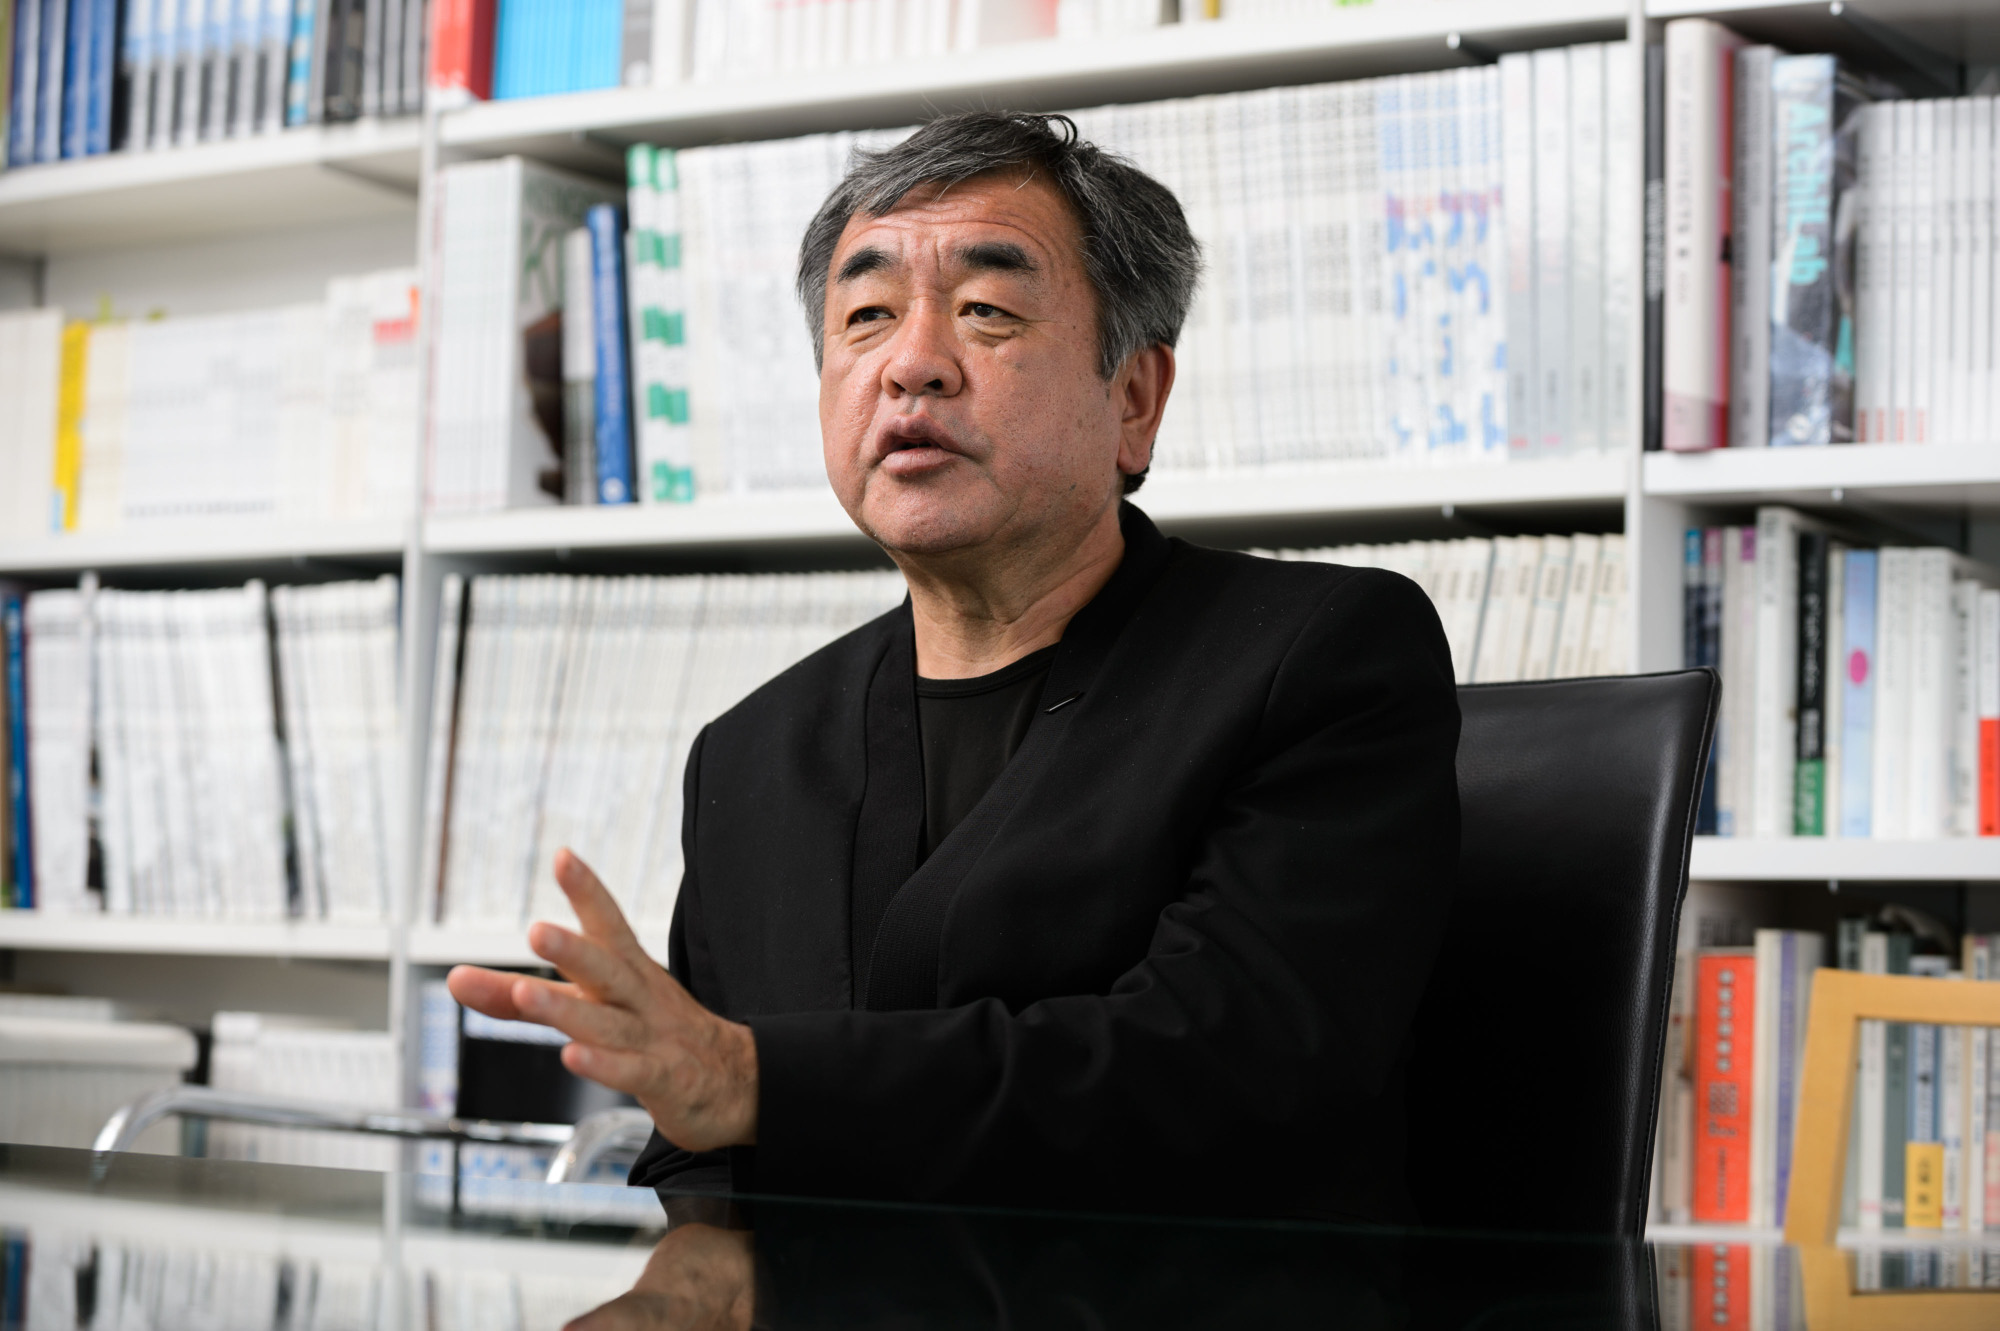 Kengo Kuma, architect for the new National Stadium for the 2020 Olympics, says during an interview in Tokyo this month that he wants to utilize Japanese timber for the centerpiece venue. | BLOOMBERG